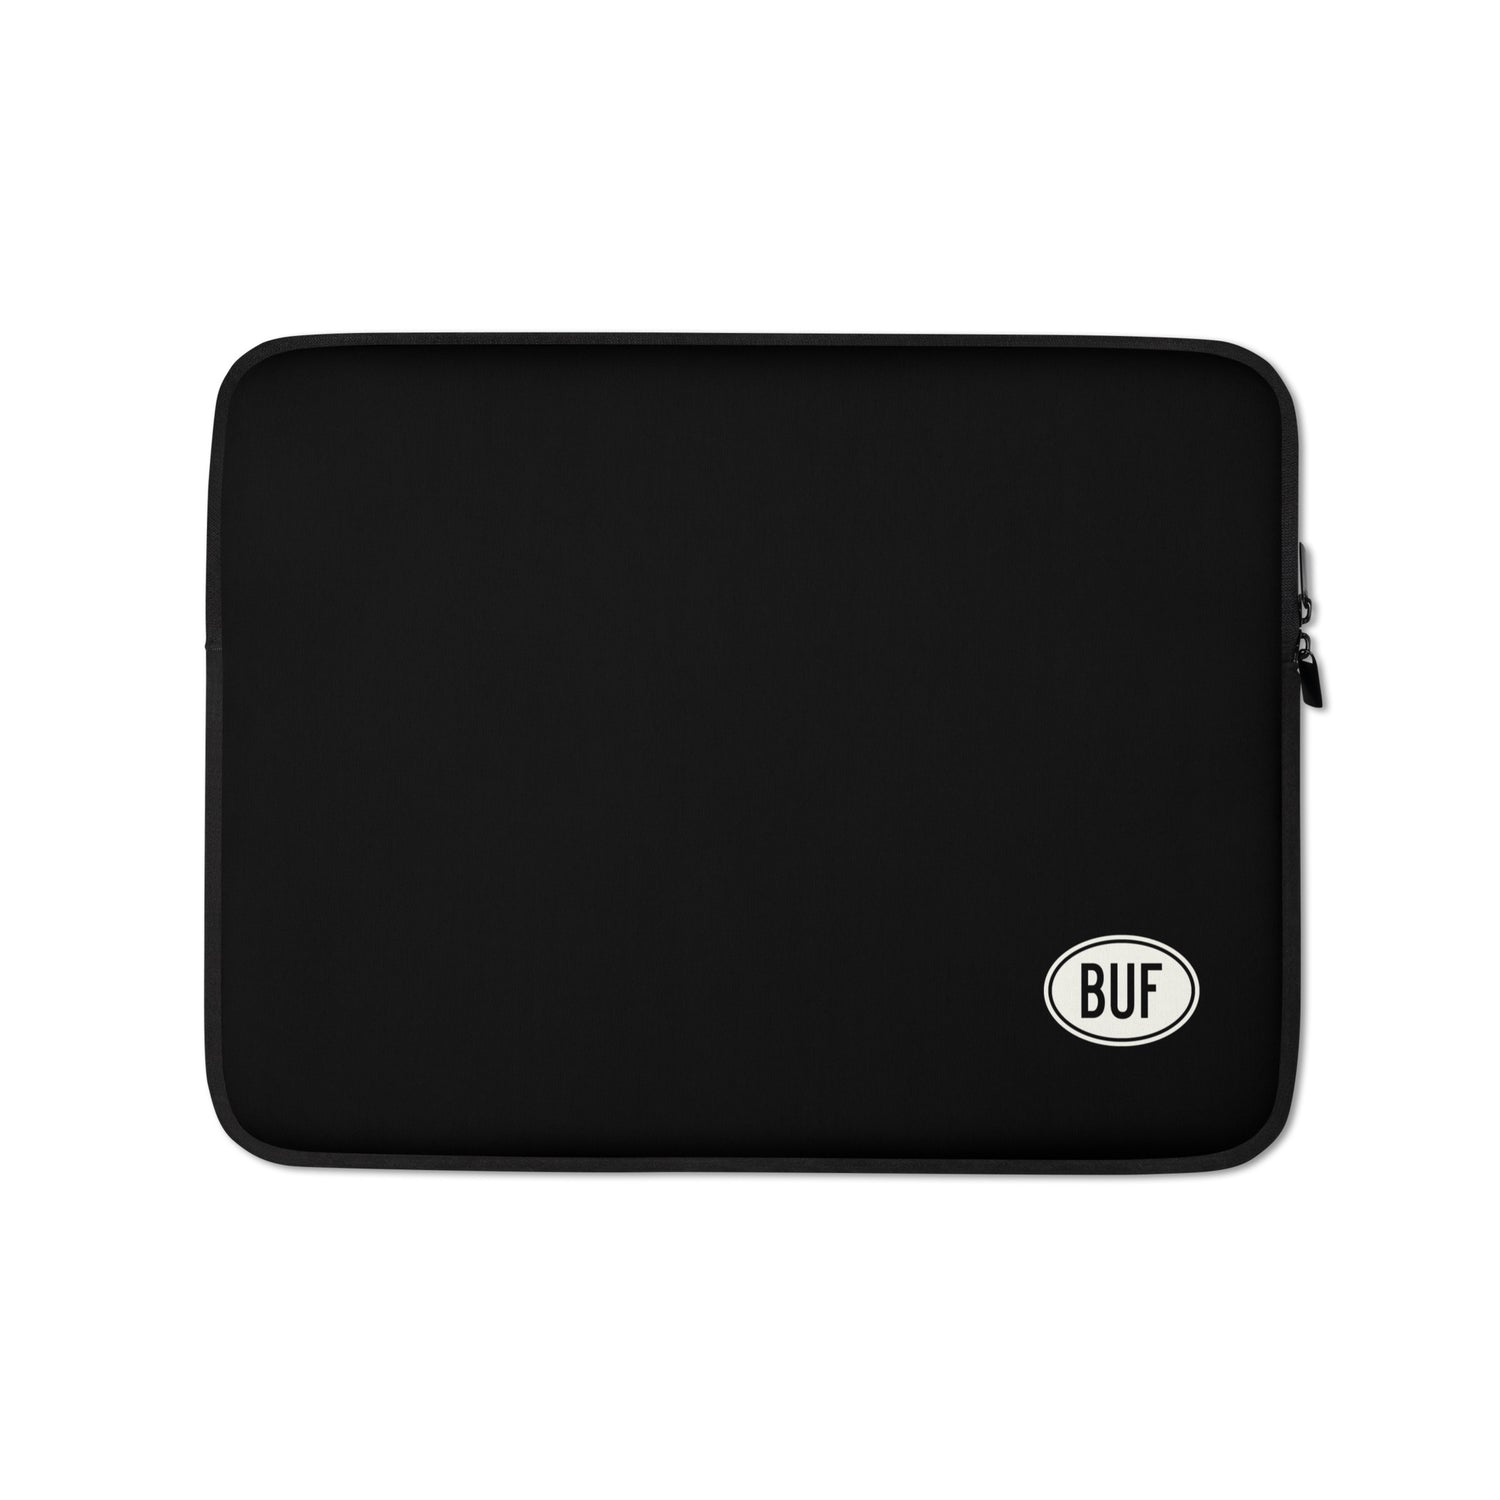 Buffalo New York Office and Tech Accessories • BUF Airport Code